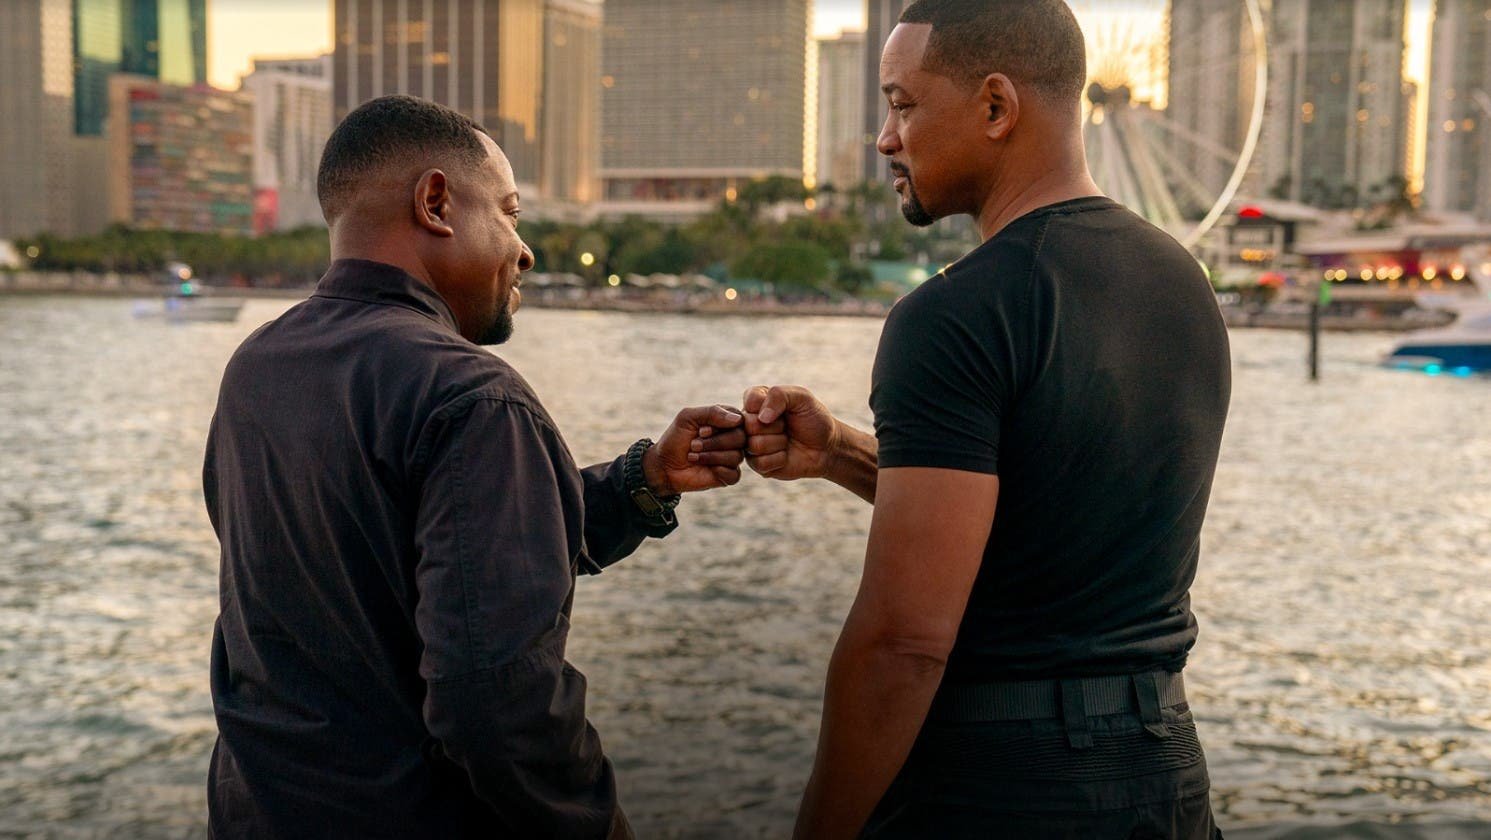 Watch the Red Band Trailer for Bad Boys Ride or Die Starring Will Smith and Martin Lawrence